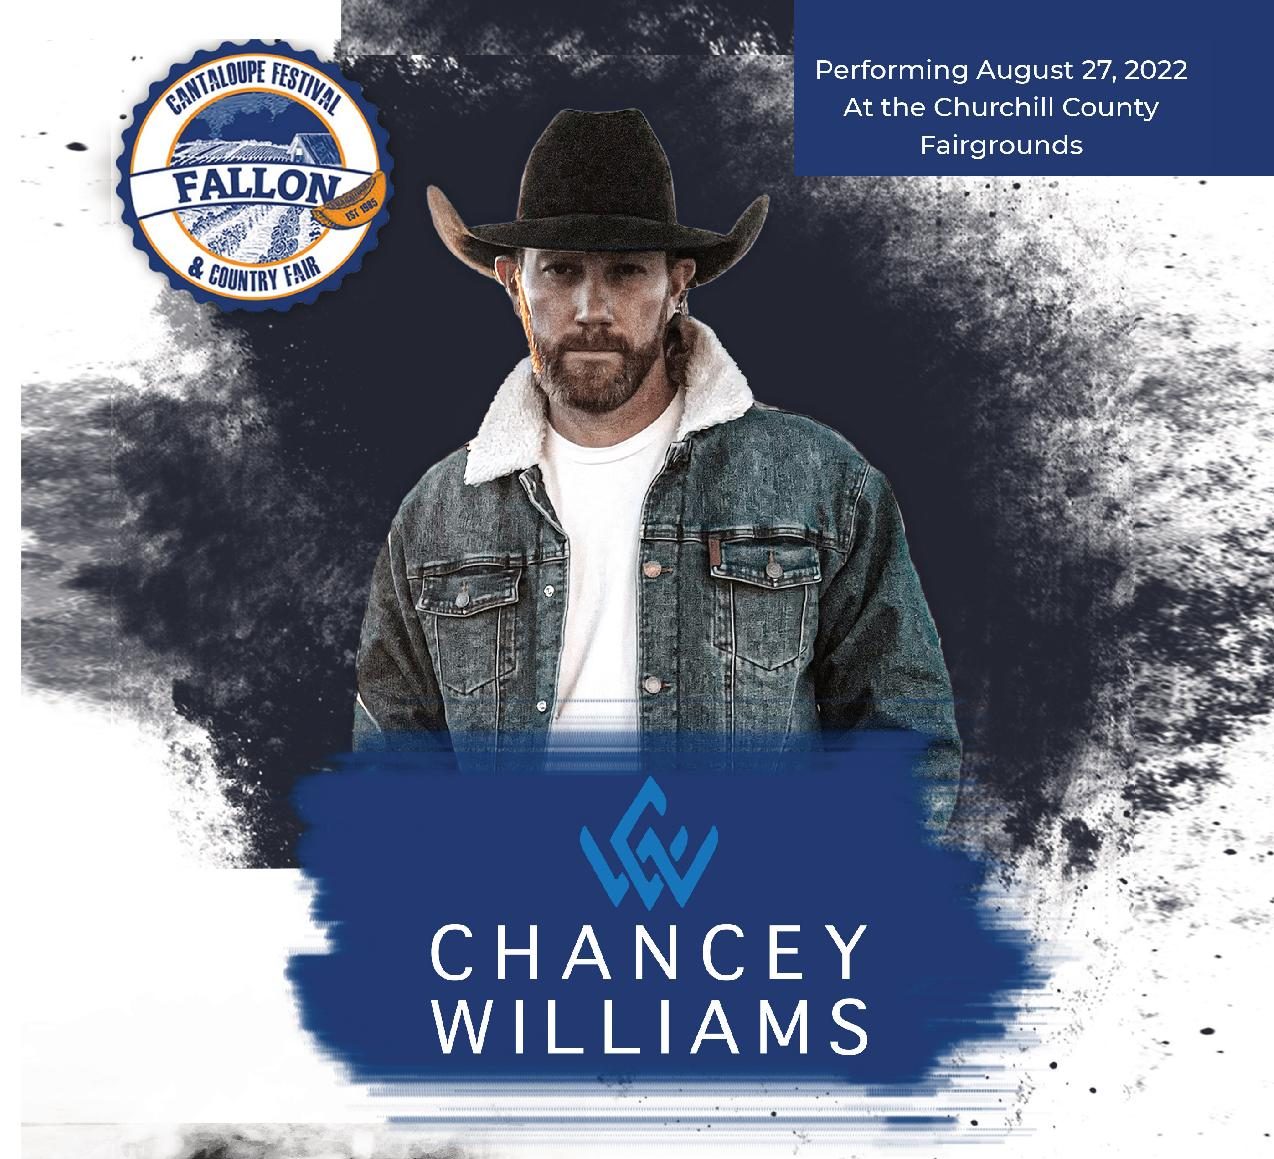 Chancey Williams Concert Poster